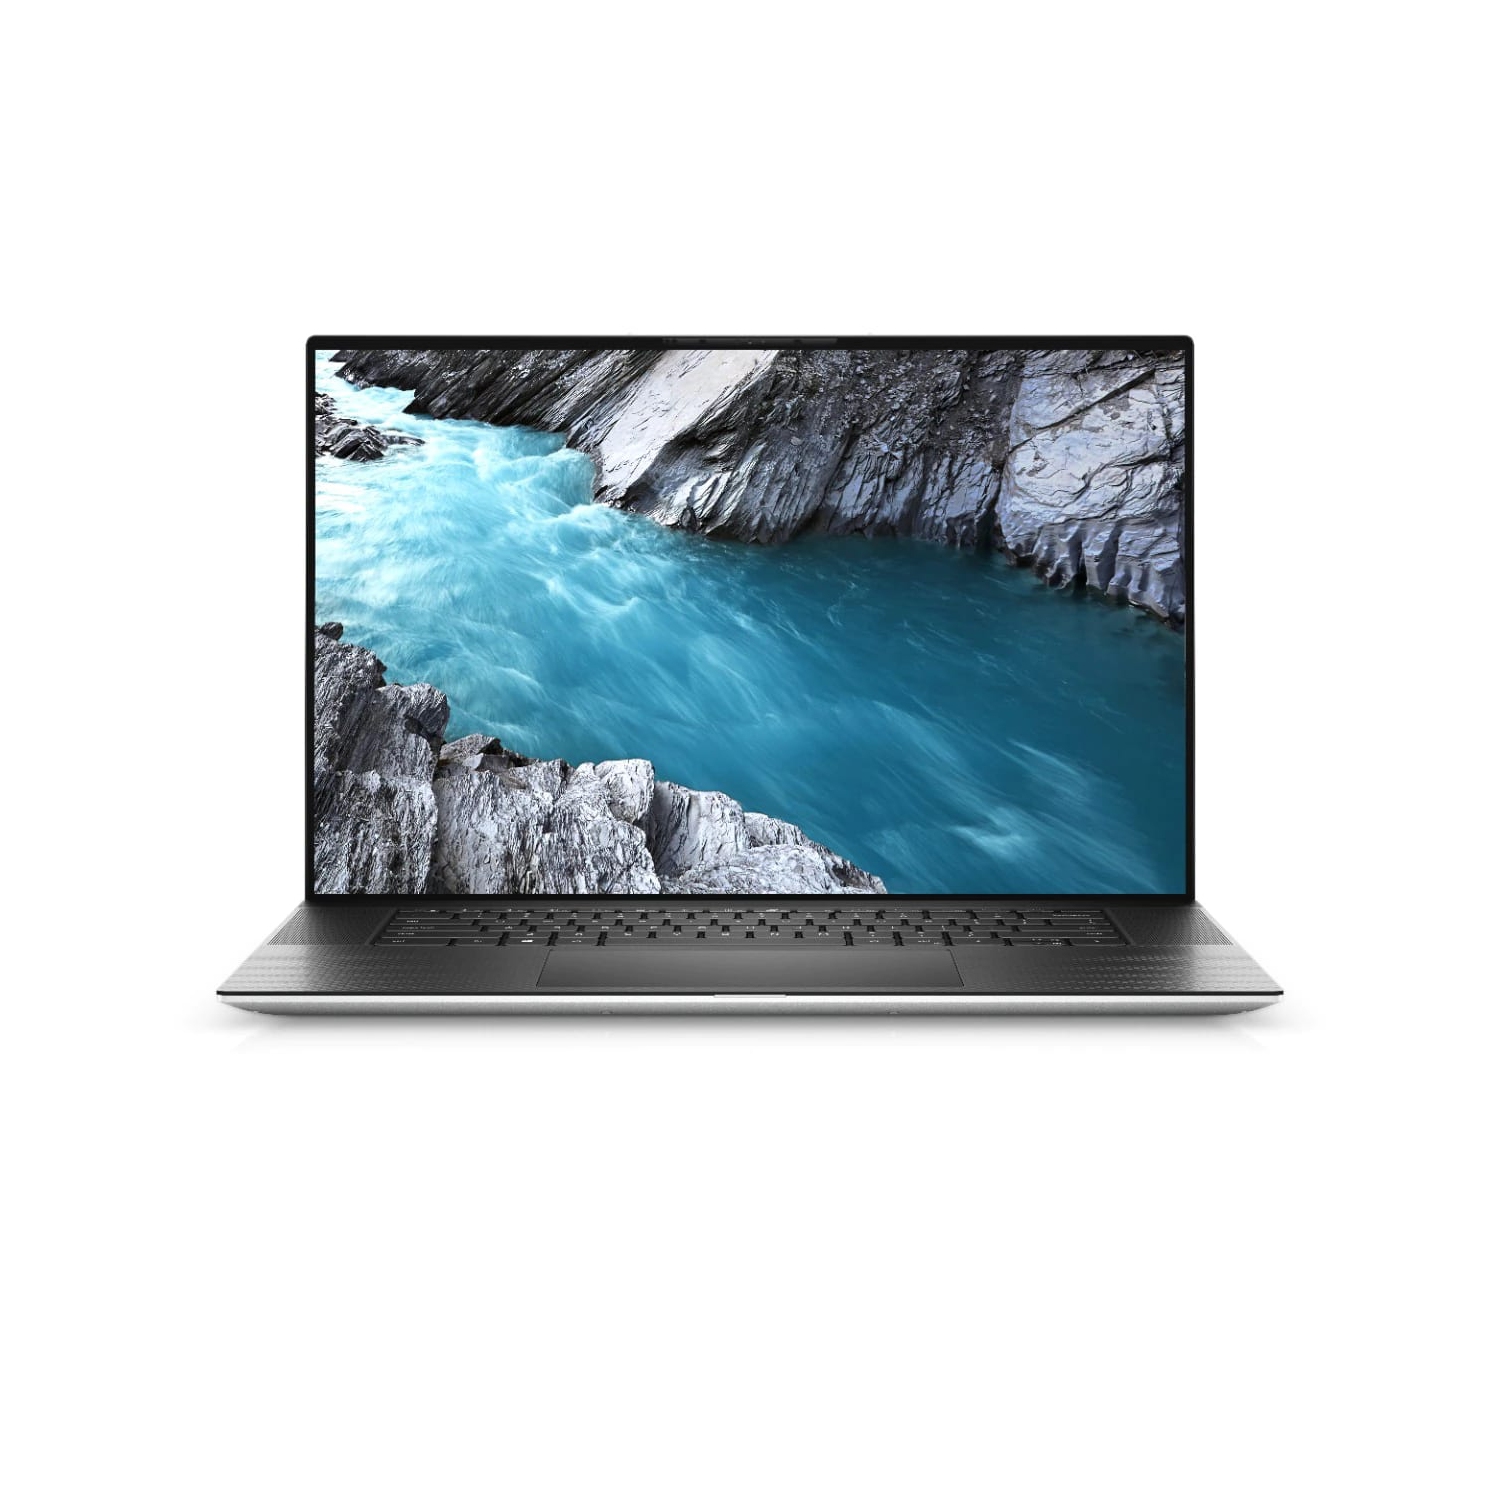 Refurbished (Excellent) - Dell XPS 17 9700 Laptop (2020) | 17" 4K Touch | Core i9 - 2TB SSD - 32GB RAM - RTX 2060 | 8 Cores @ 5.3 GHz - 10th Gen CPU Certified Refurbished